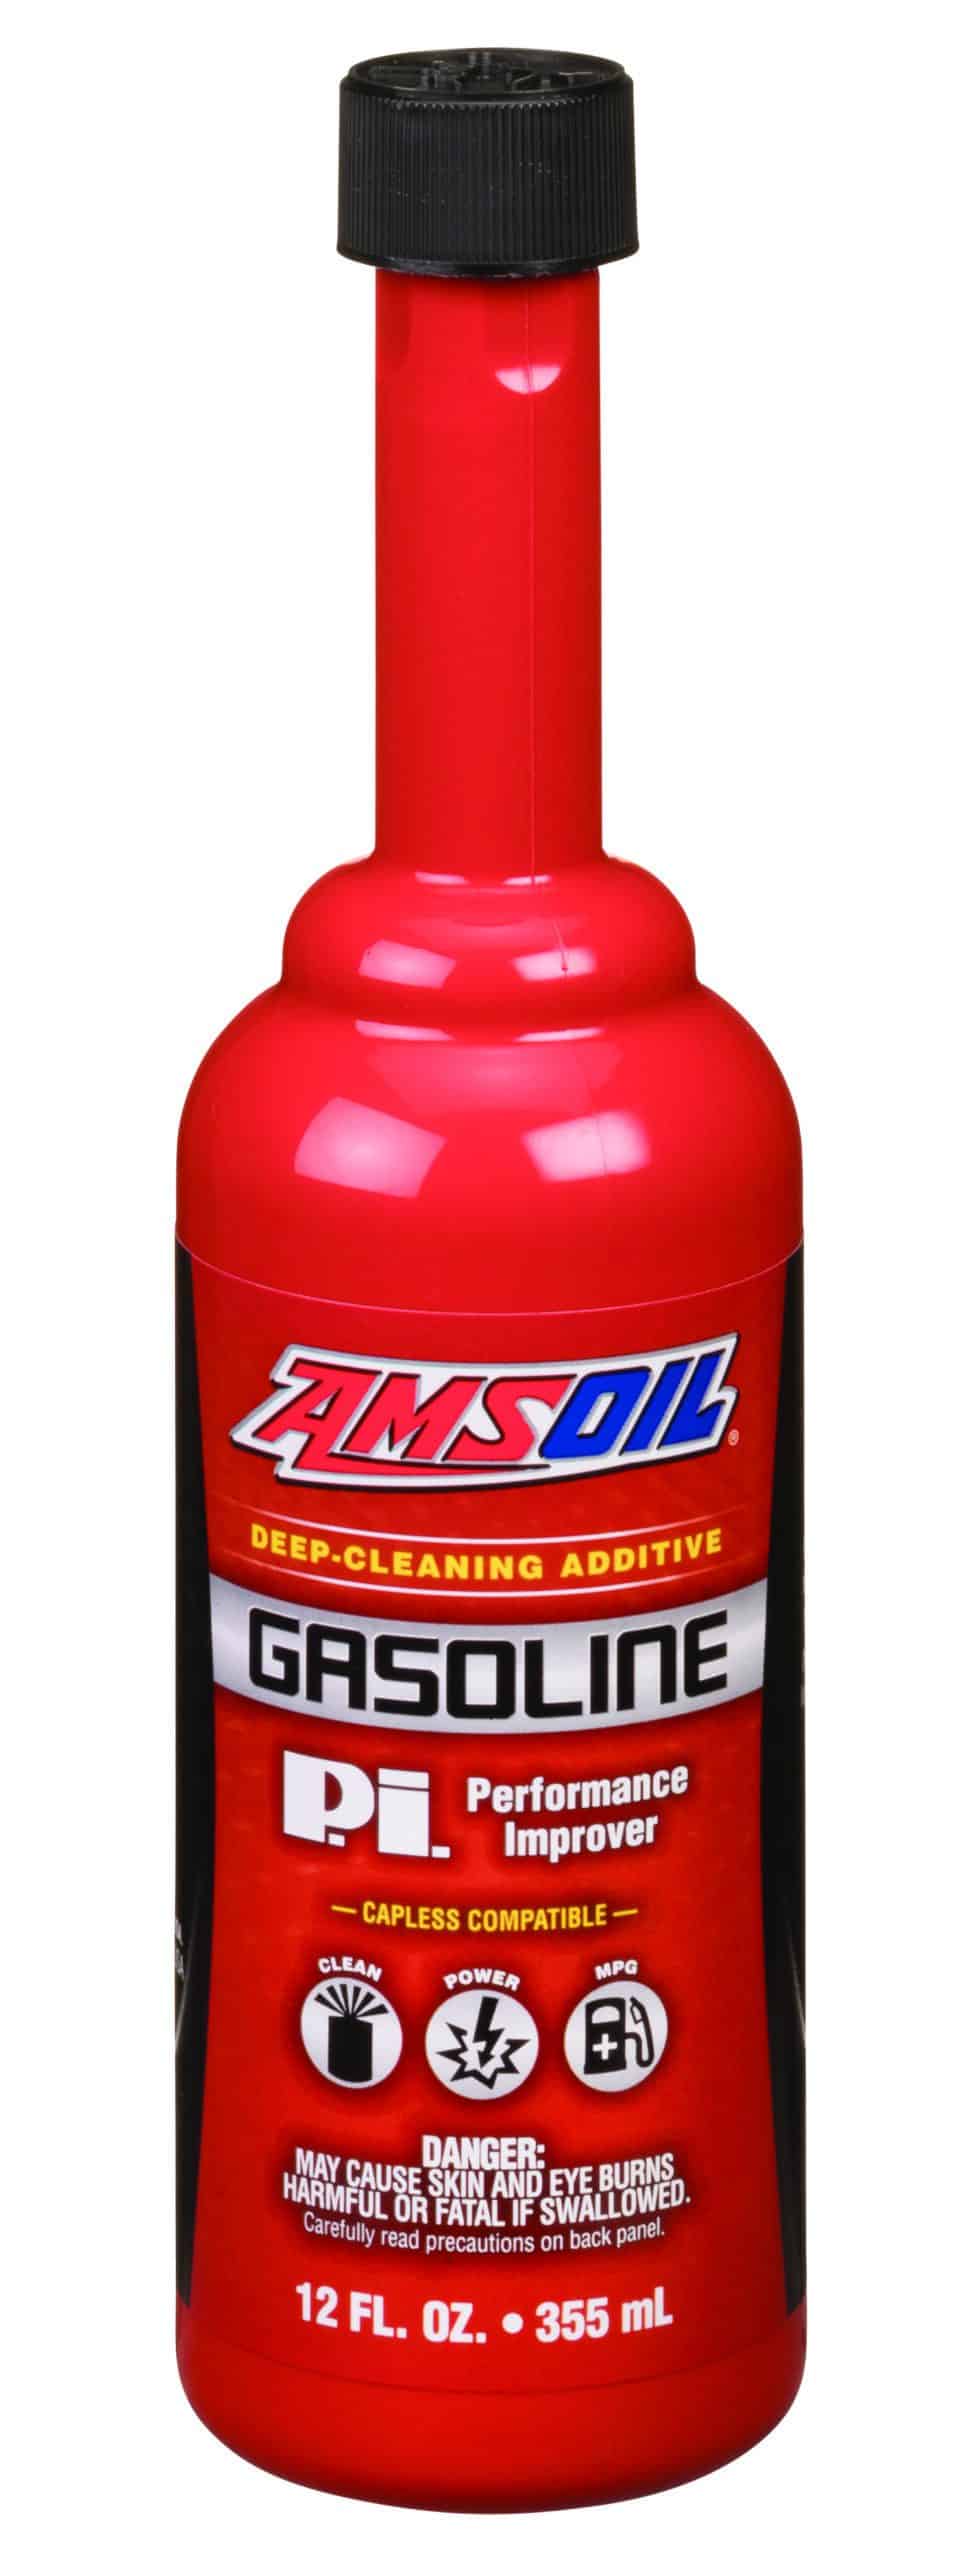 A bottle of AMSOIL Performance Improver Gasoline Additive. It is very potent and cleans the entire fuel system and restores up to 14% horsepower in one tank of gasoline.